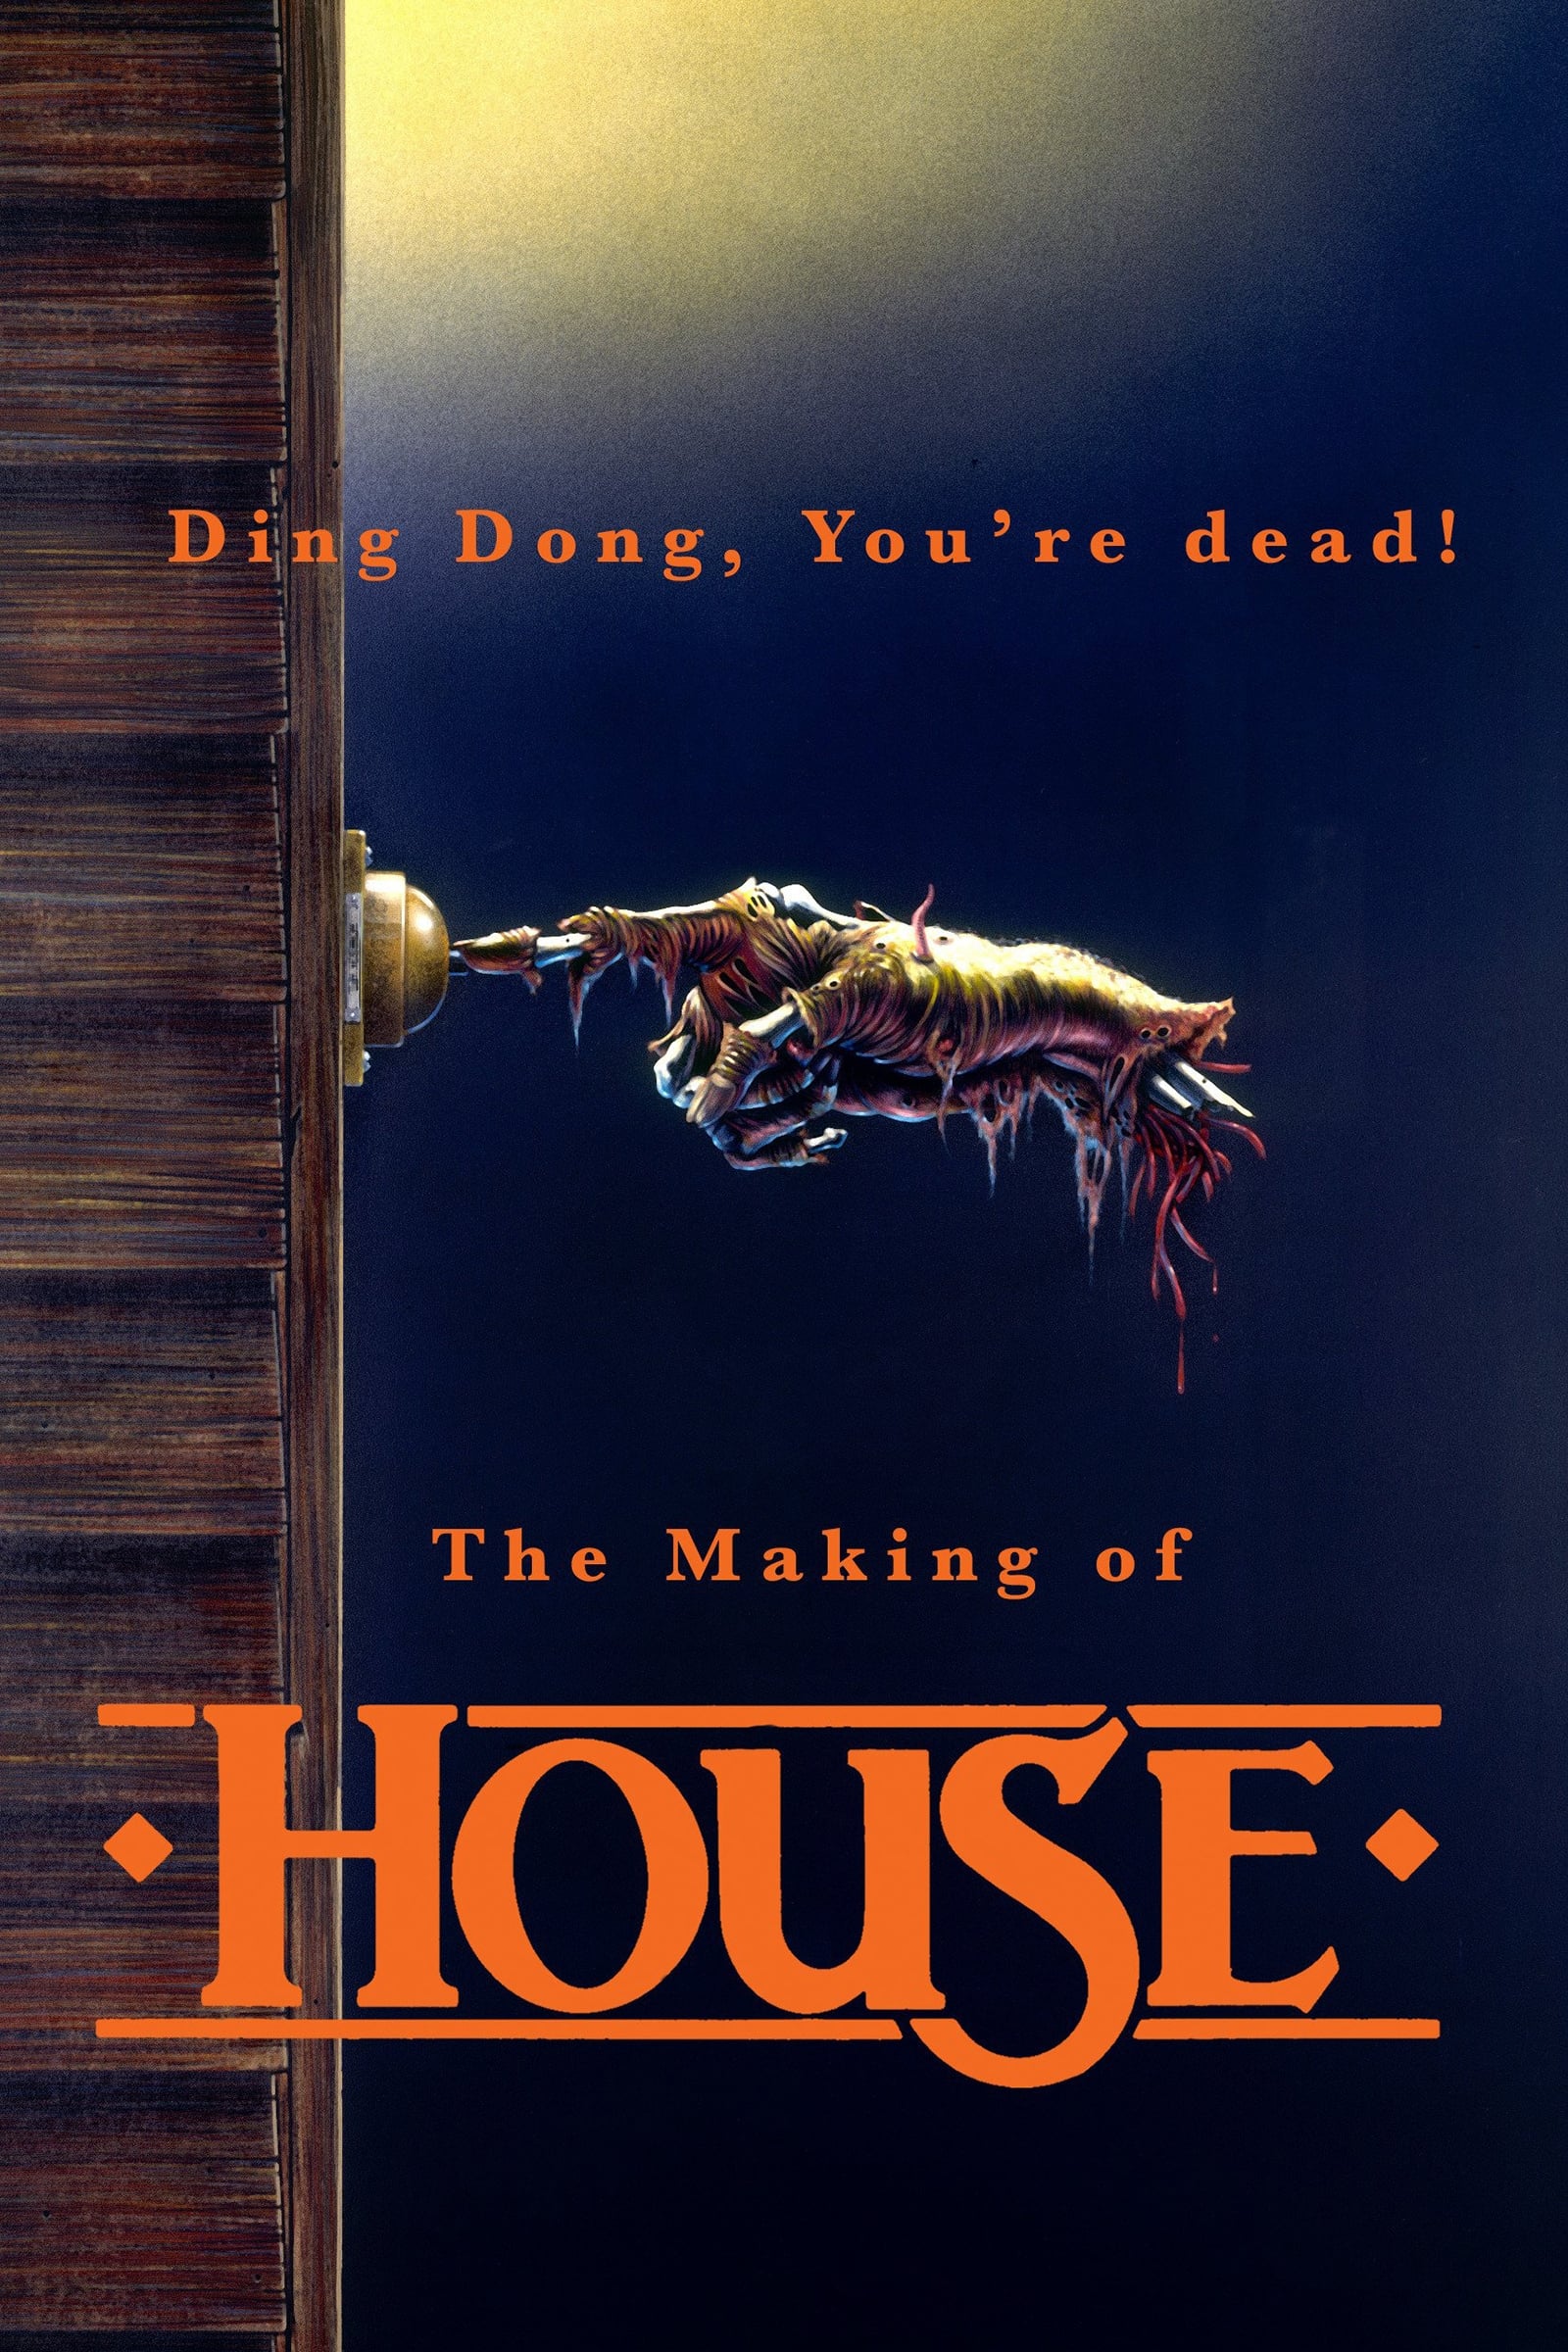 Ding Dong, You're Dead! The Making of "House" (2017)